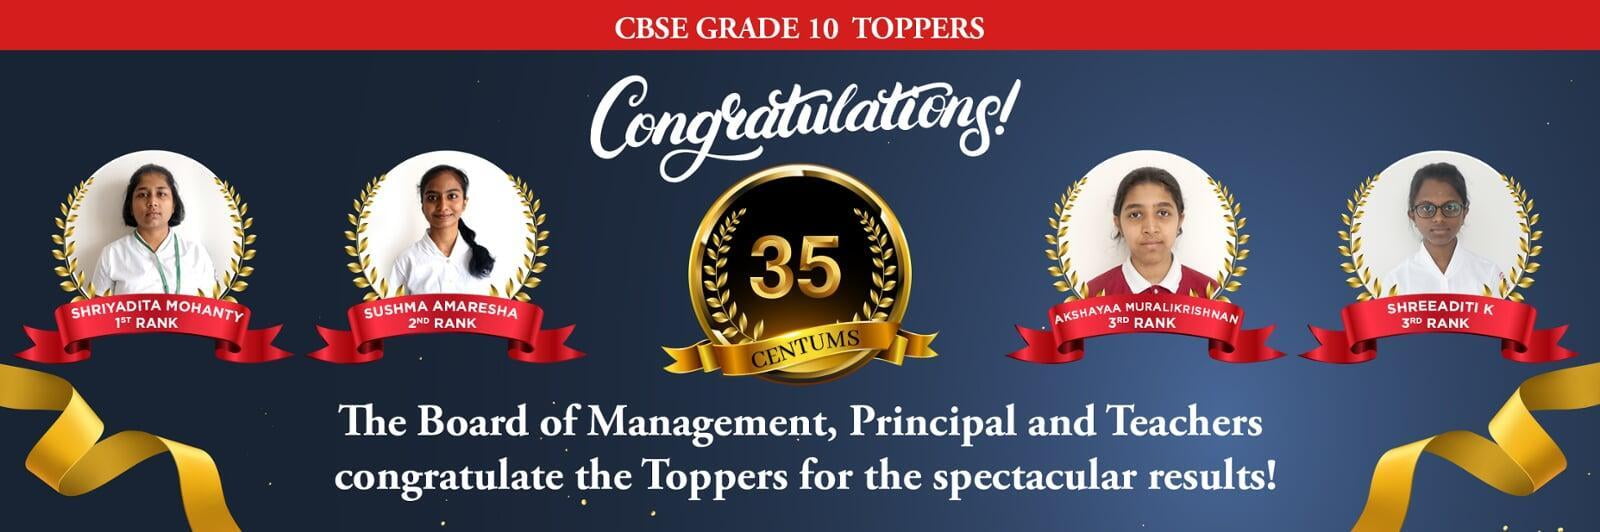 National Centre for Excellence - CBSE Grade 10 Toppers